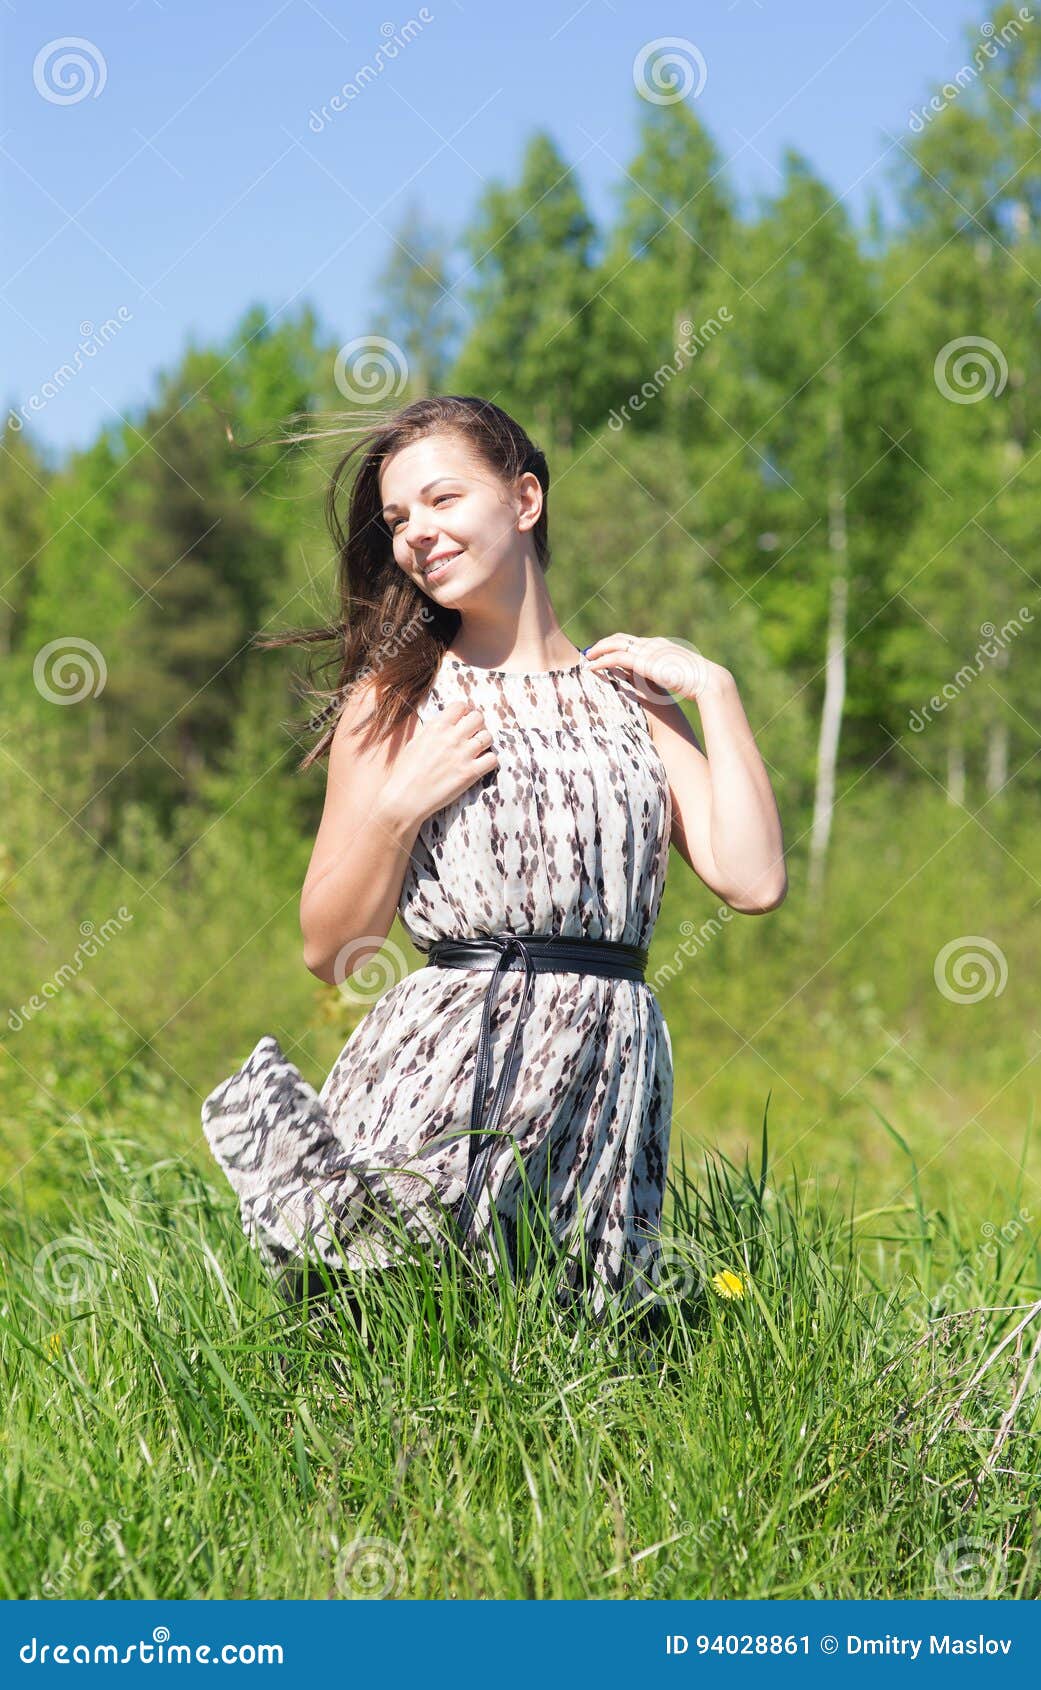 Girl on summer grass stock image. Image of carefree, summer - 94028861